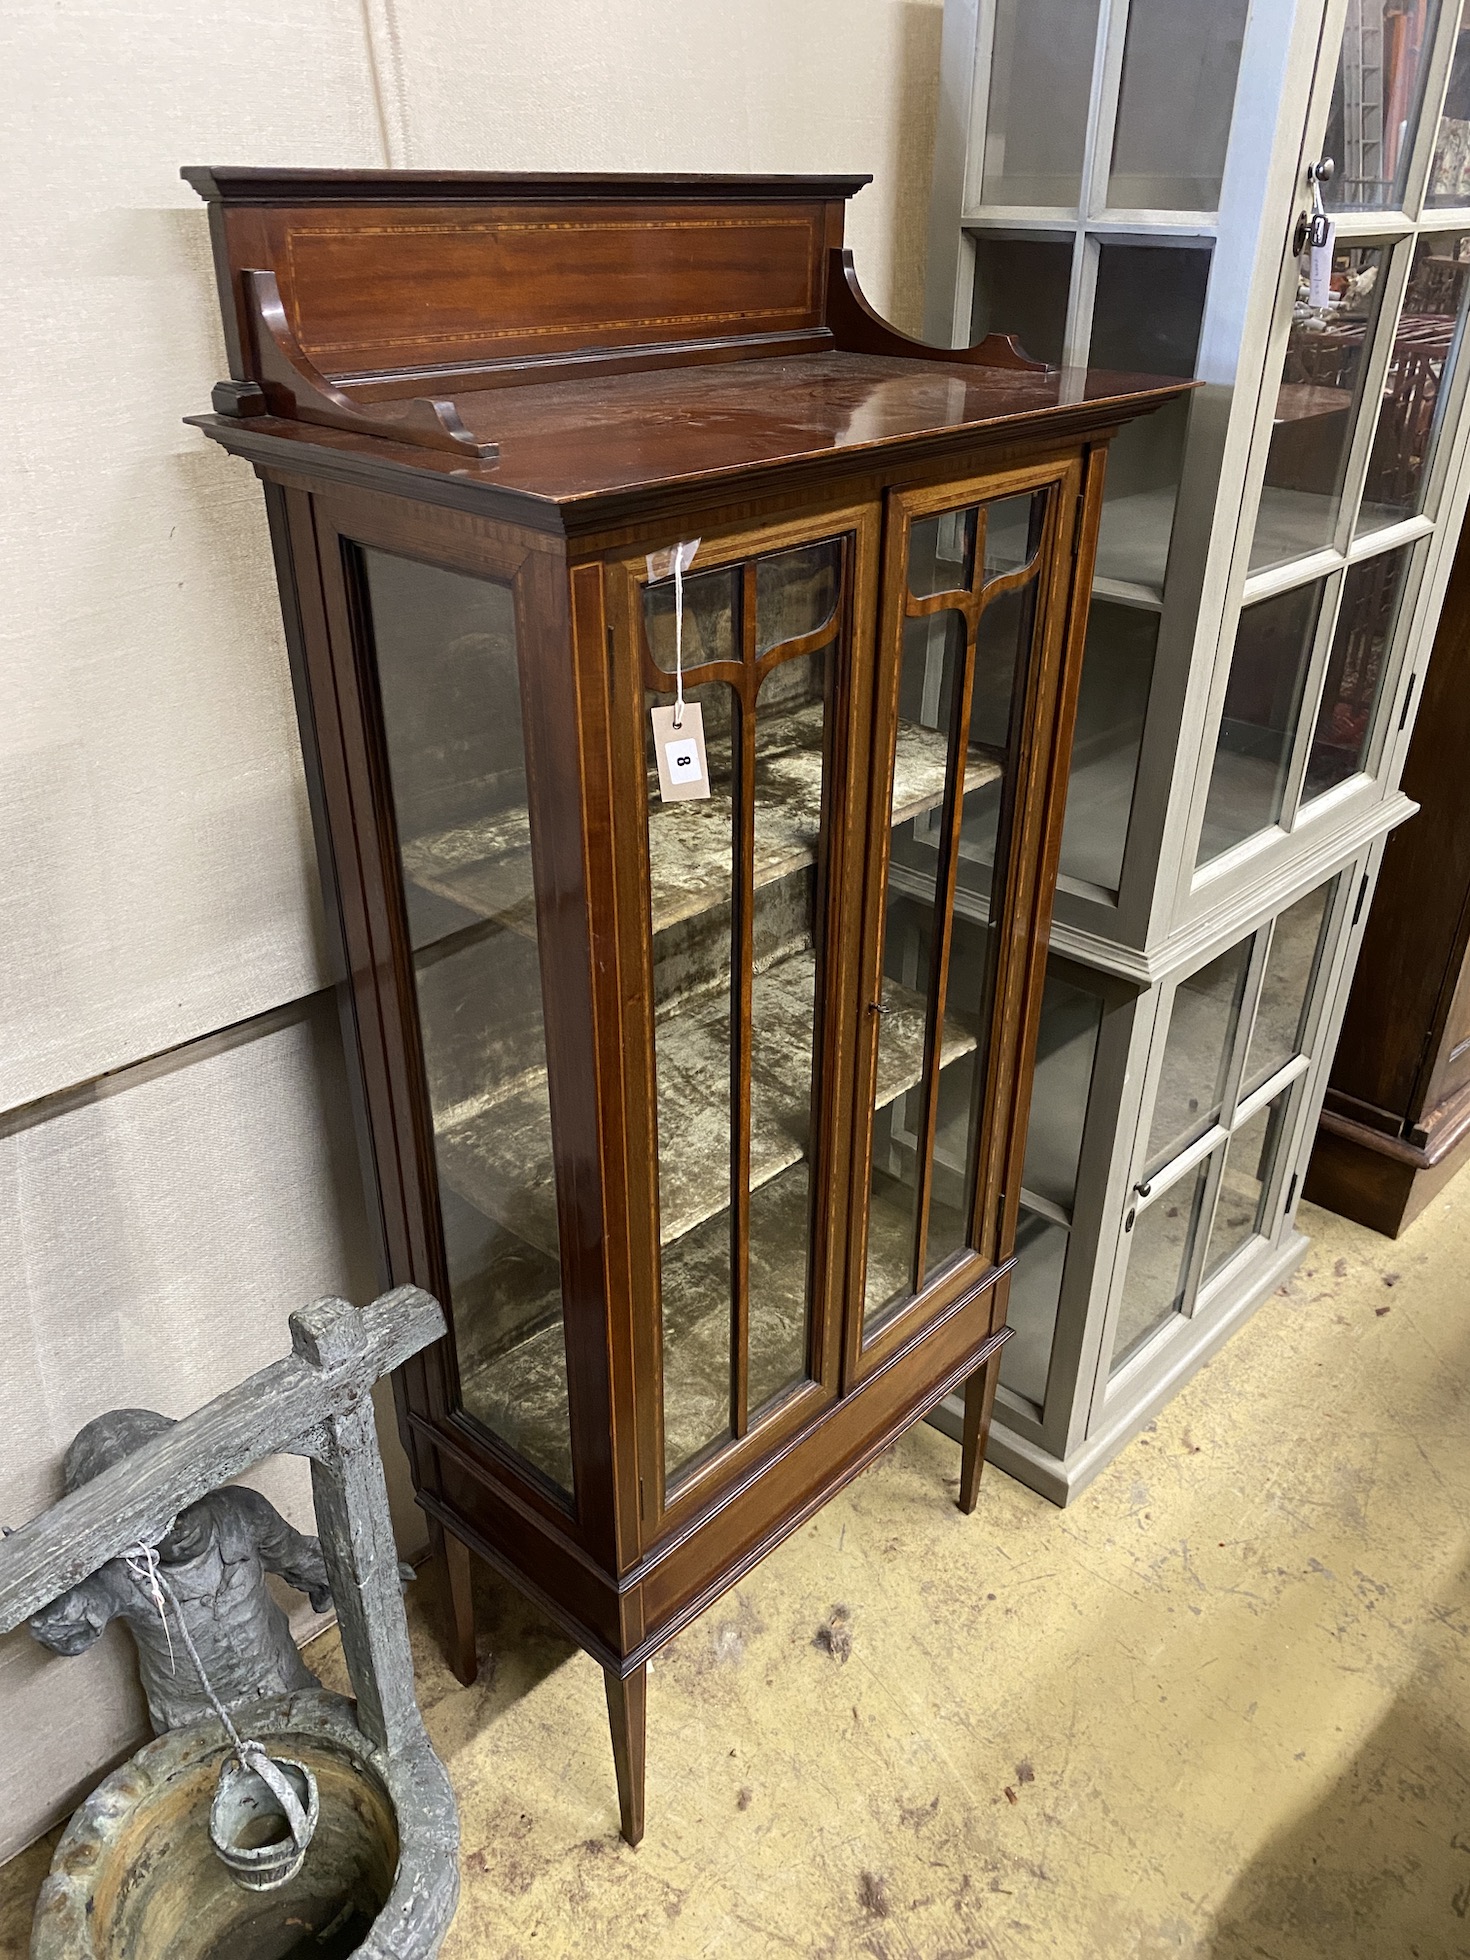 An Edwardian satinwood banded mahogany display cabinet, width 77cm, depth 40cm, height 157cm - Image 2 of 2